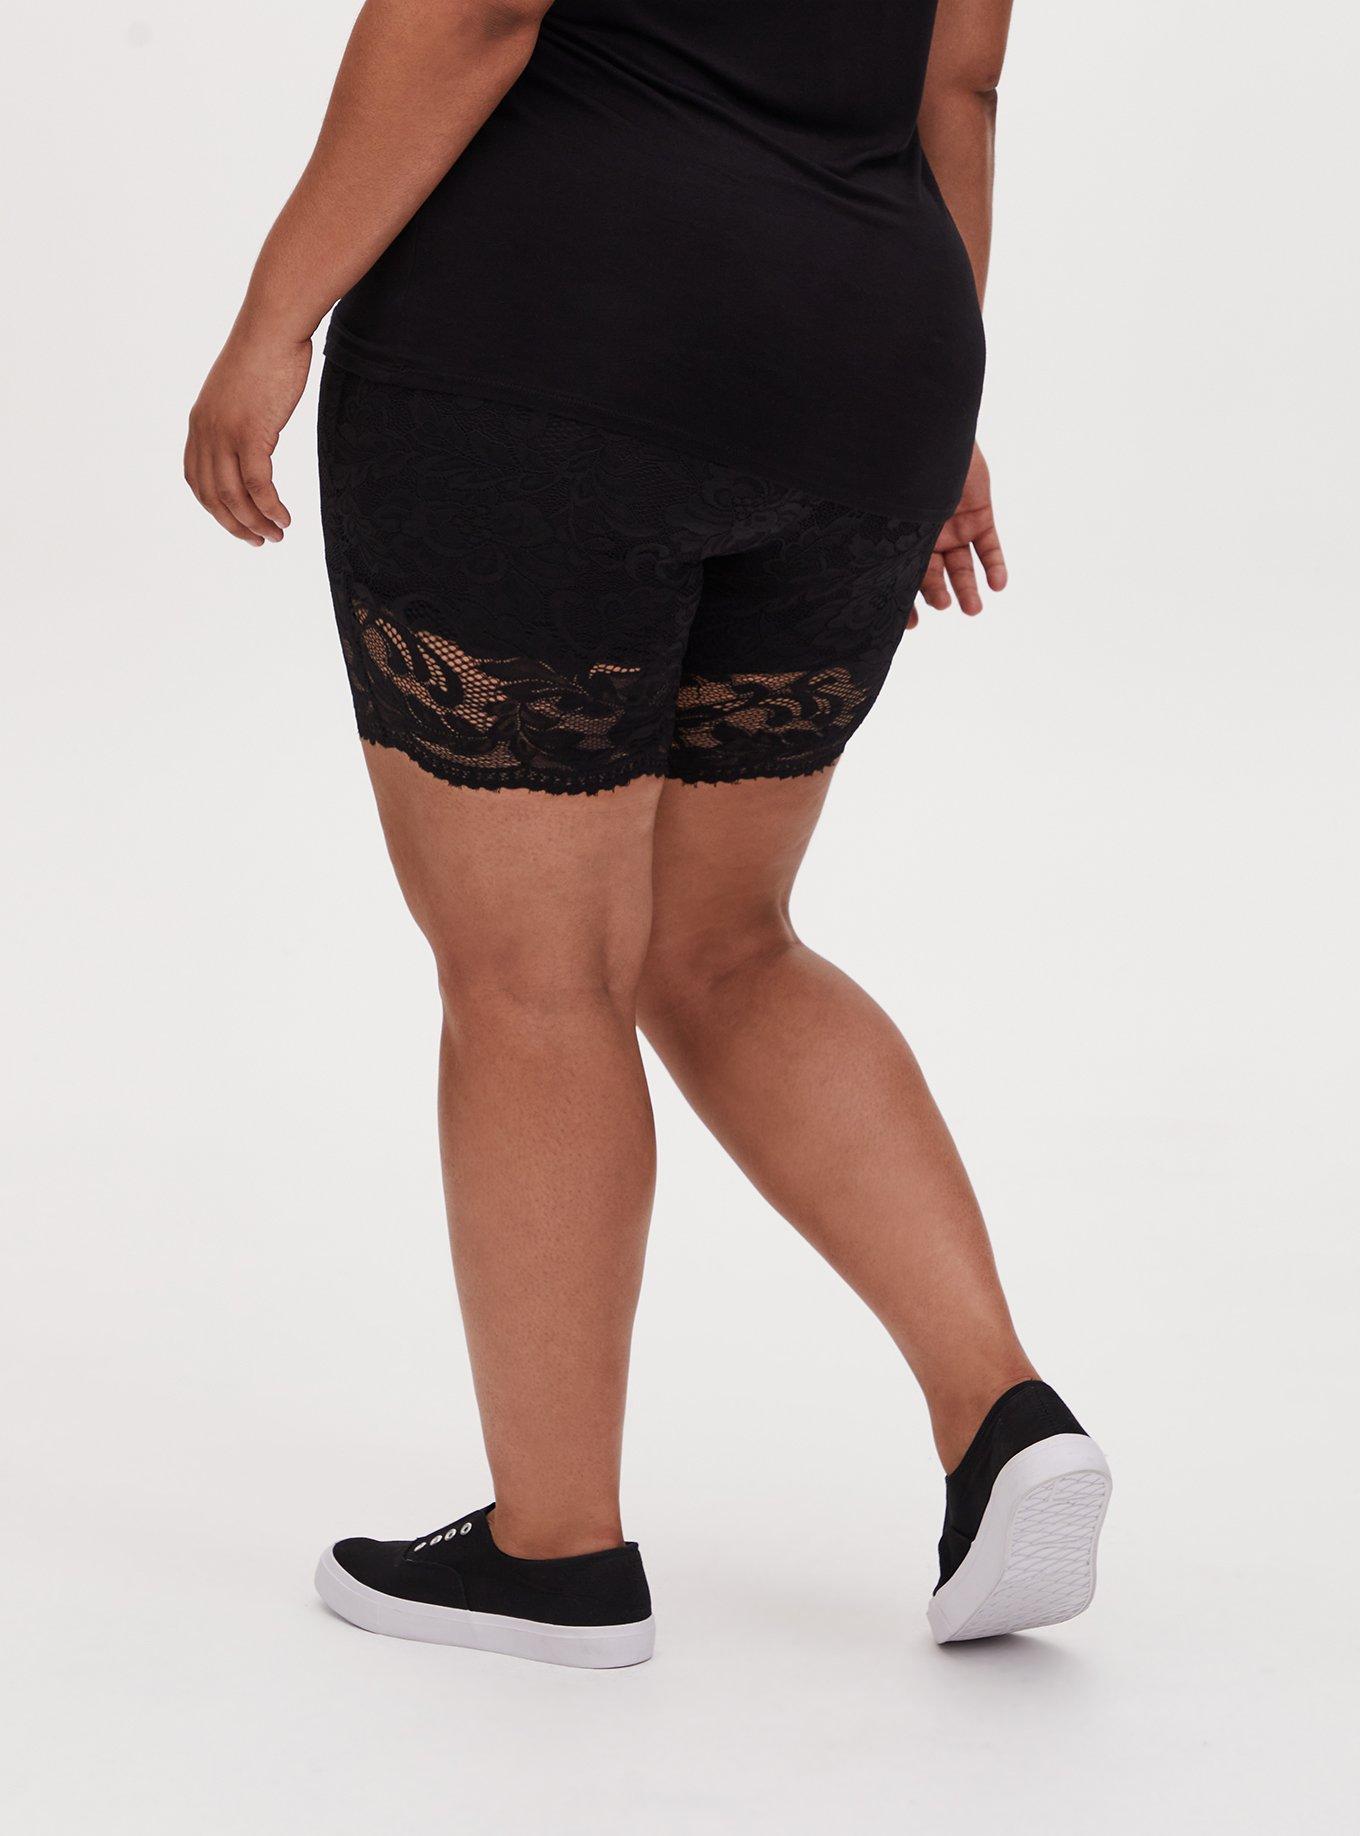 Cotton Plus Size Bike Shorts With Lace Trim Curvy Girl Thigh Protectors -   Canada